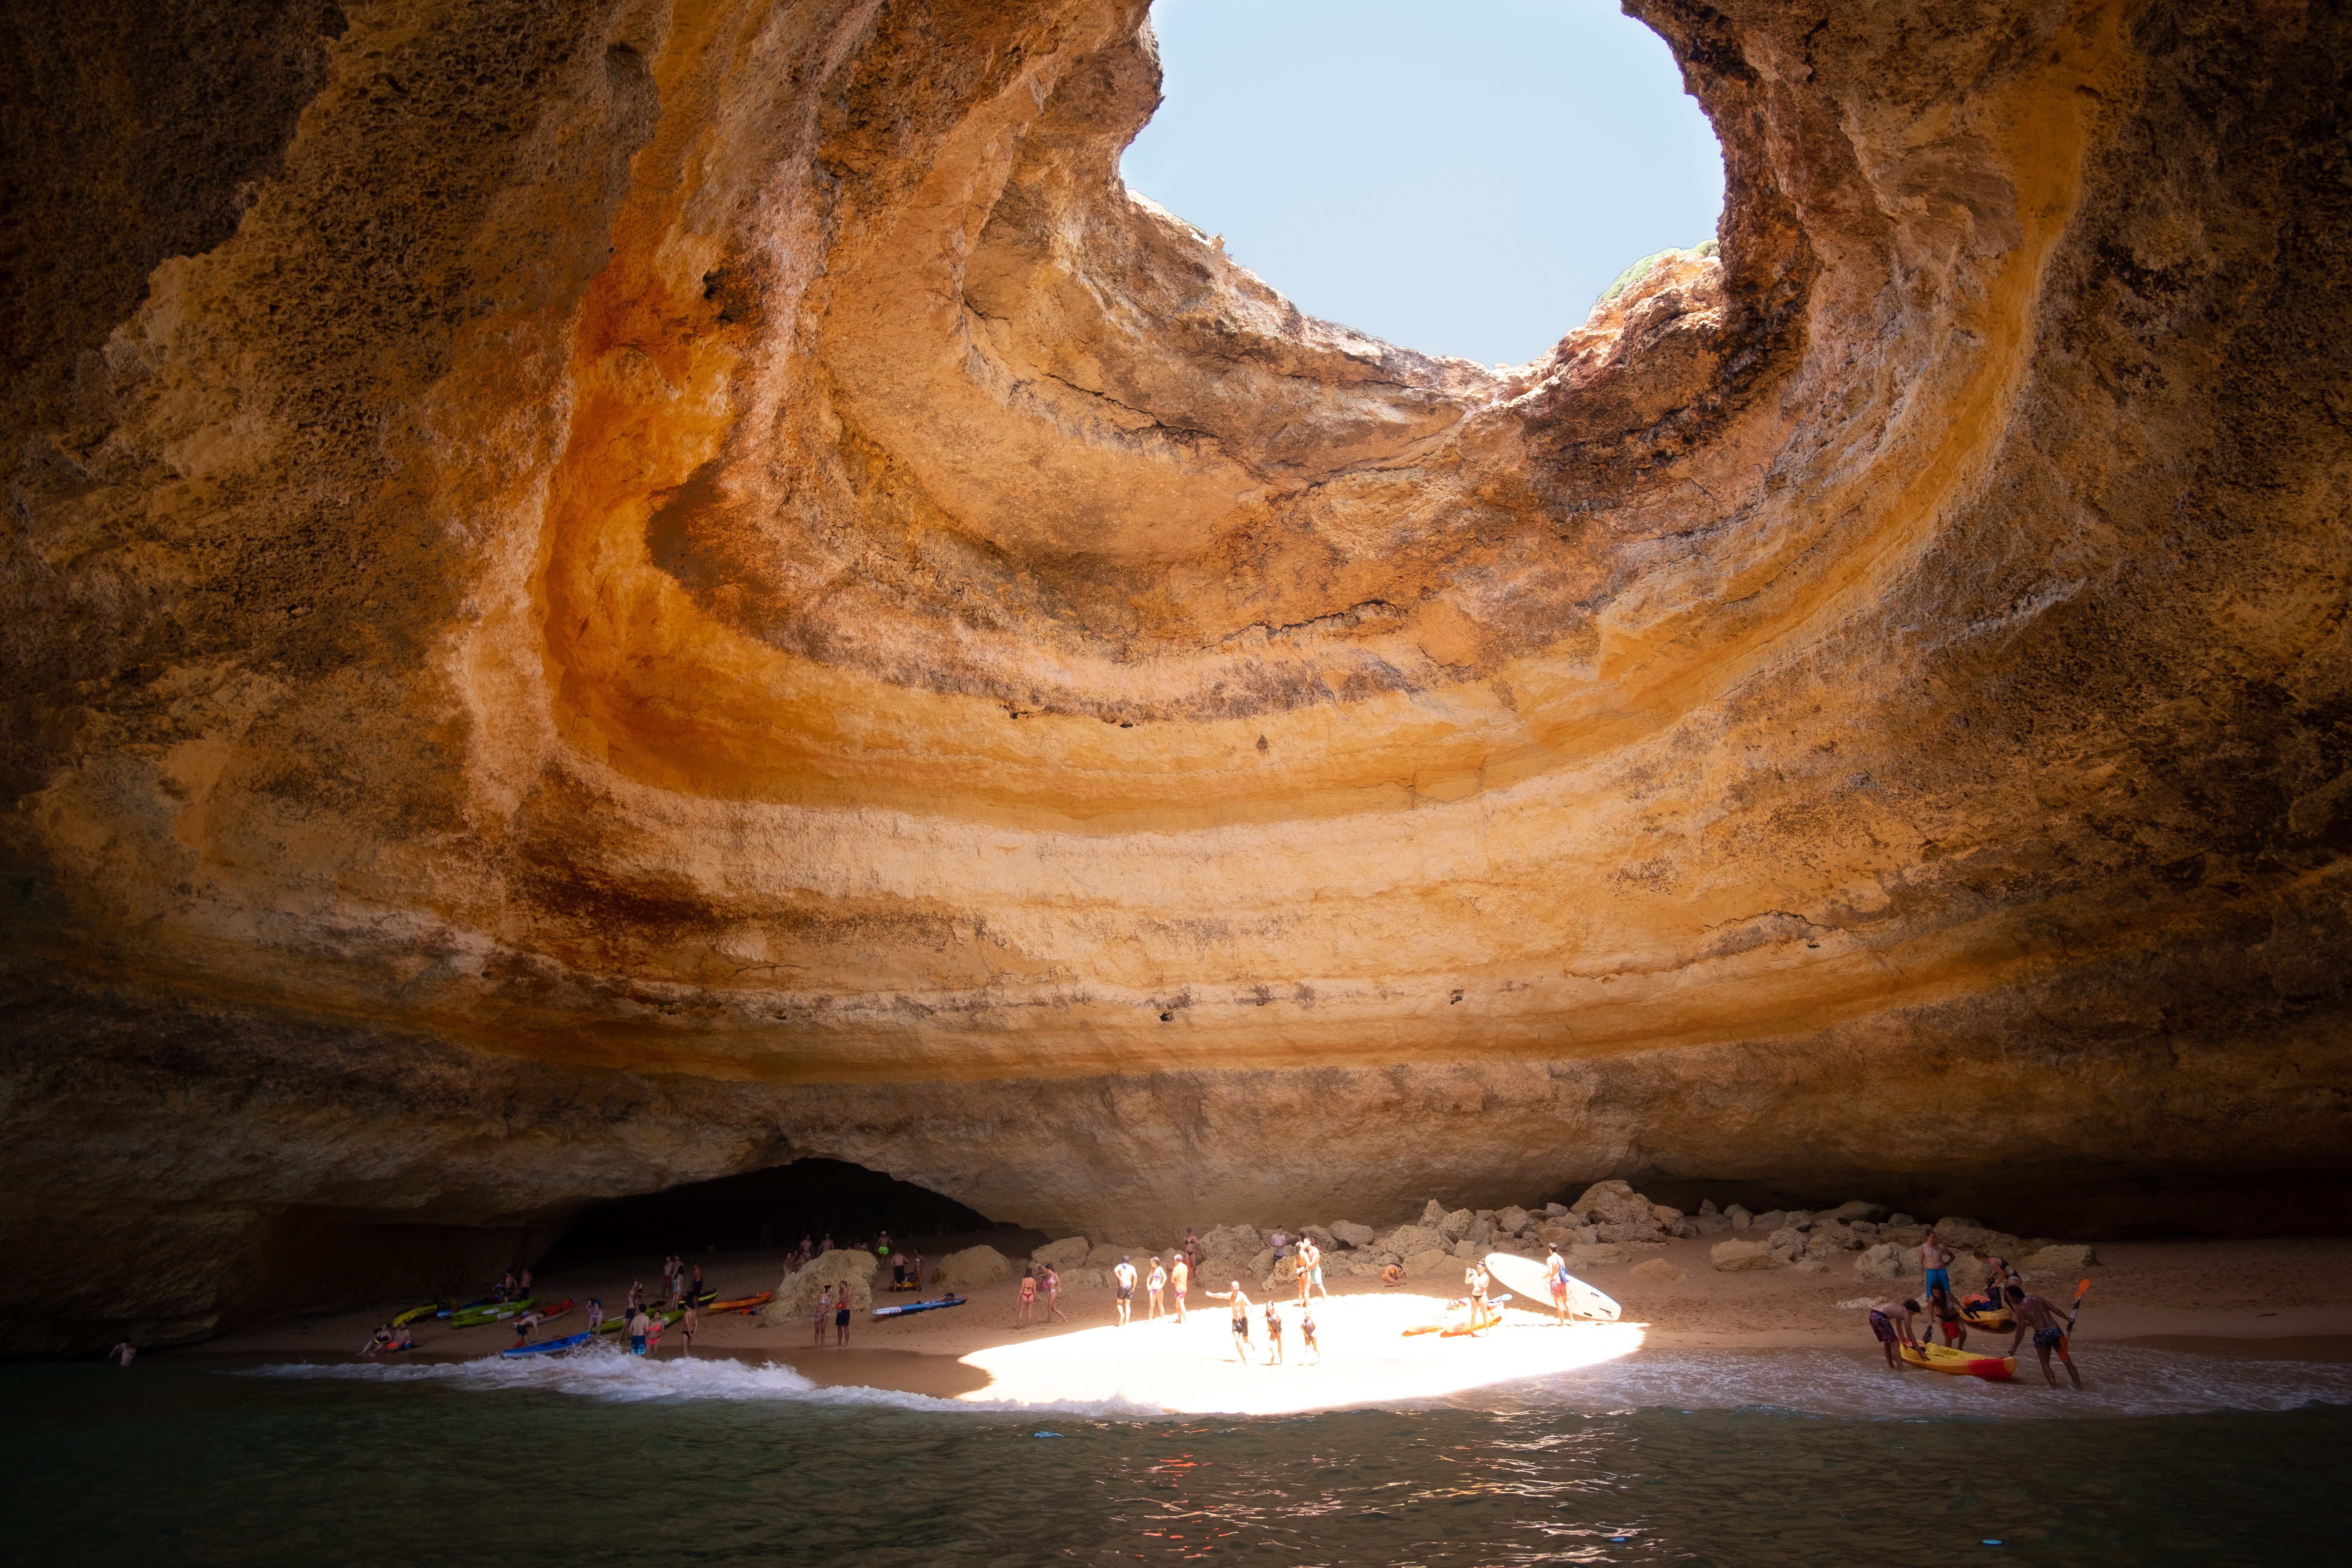 Famous sea cave at Benagil beach in Algarve, Portugal. Exposure of the interior of a sea cave on the Algarve coast near Benagil, Portugal, Europe